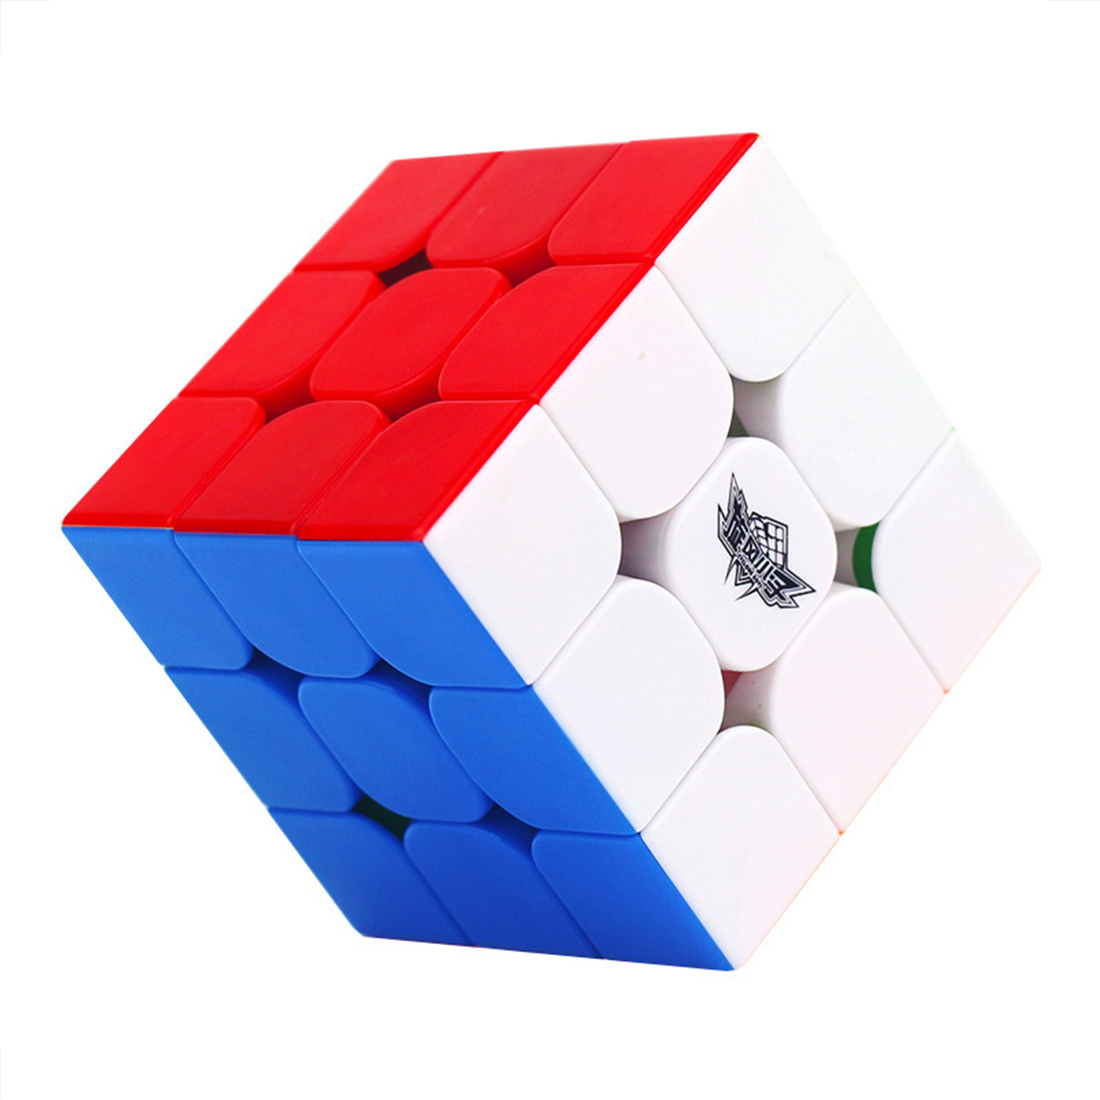 Cyclone Boys FeiJue 3x3 Magnetic Speed Cube